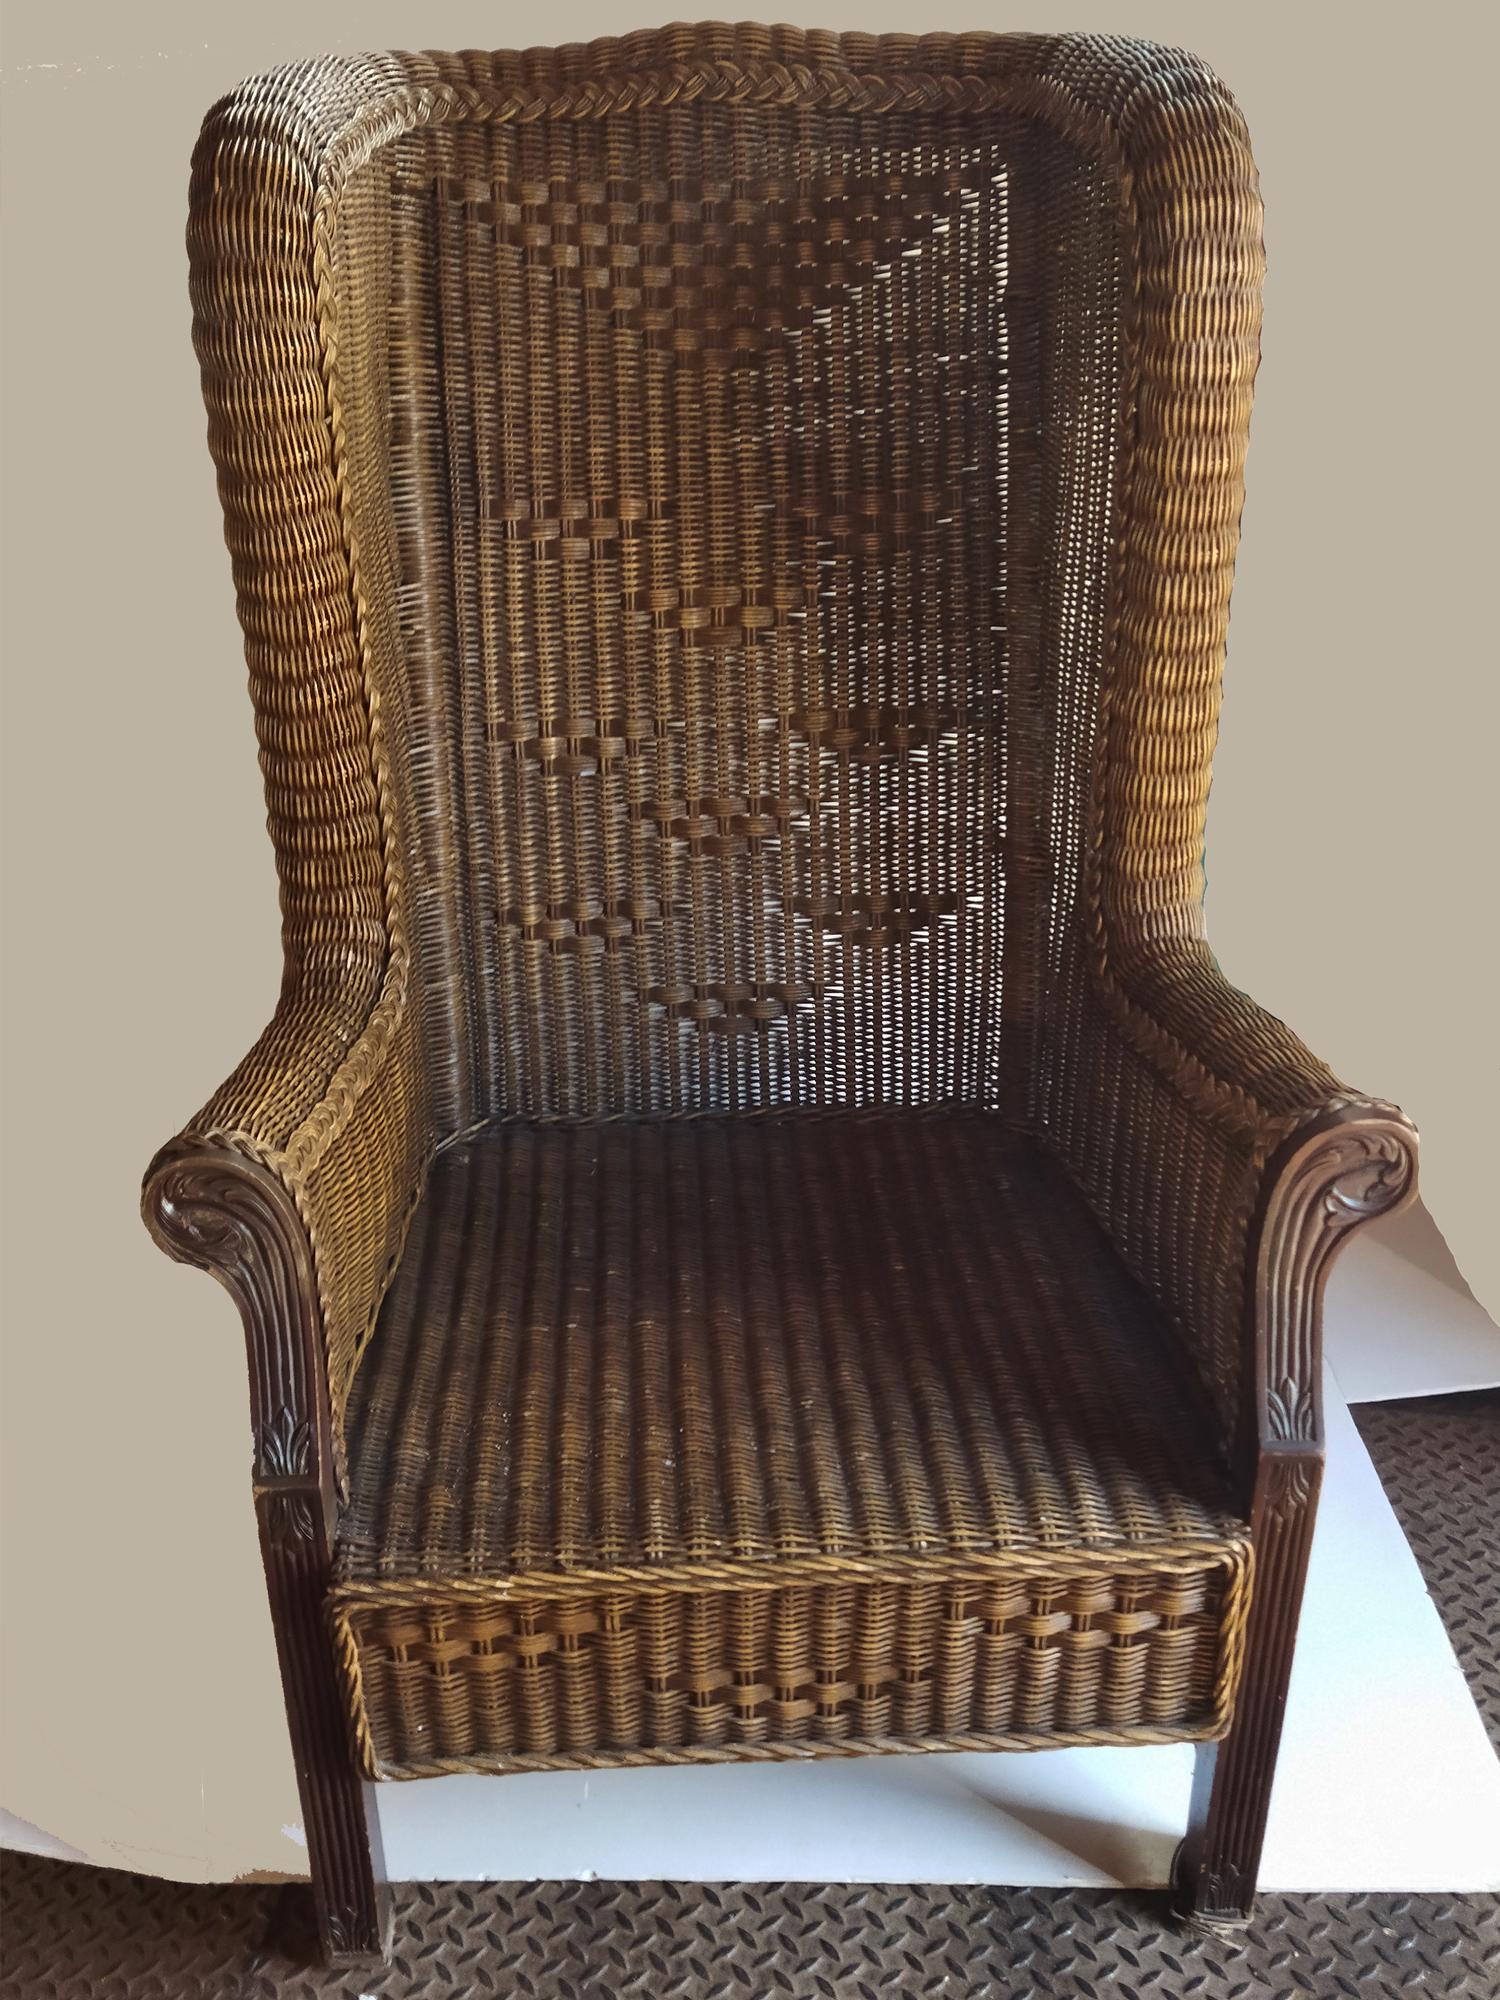  Spectacular VictorianStyle  Wicker Throne, Very Big  High Backrest  Wide Seat In Good Condition For Sale In Mombuey, Zamora